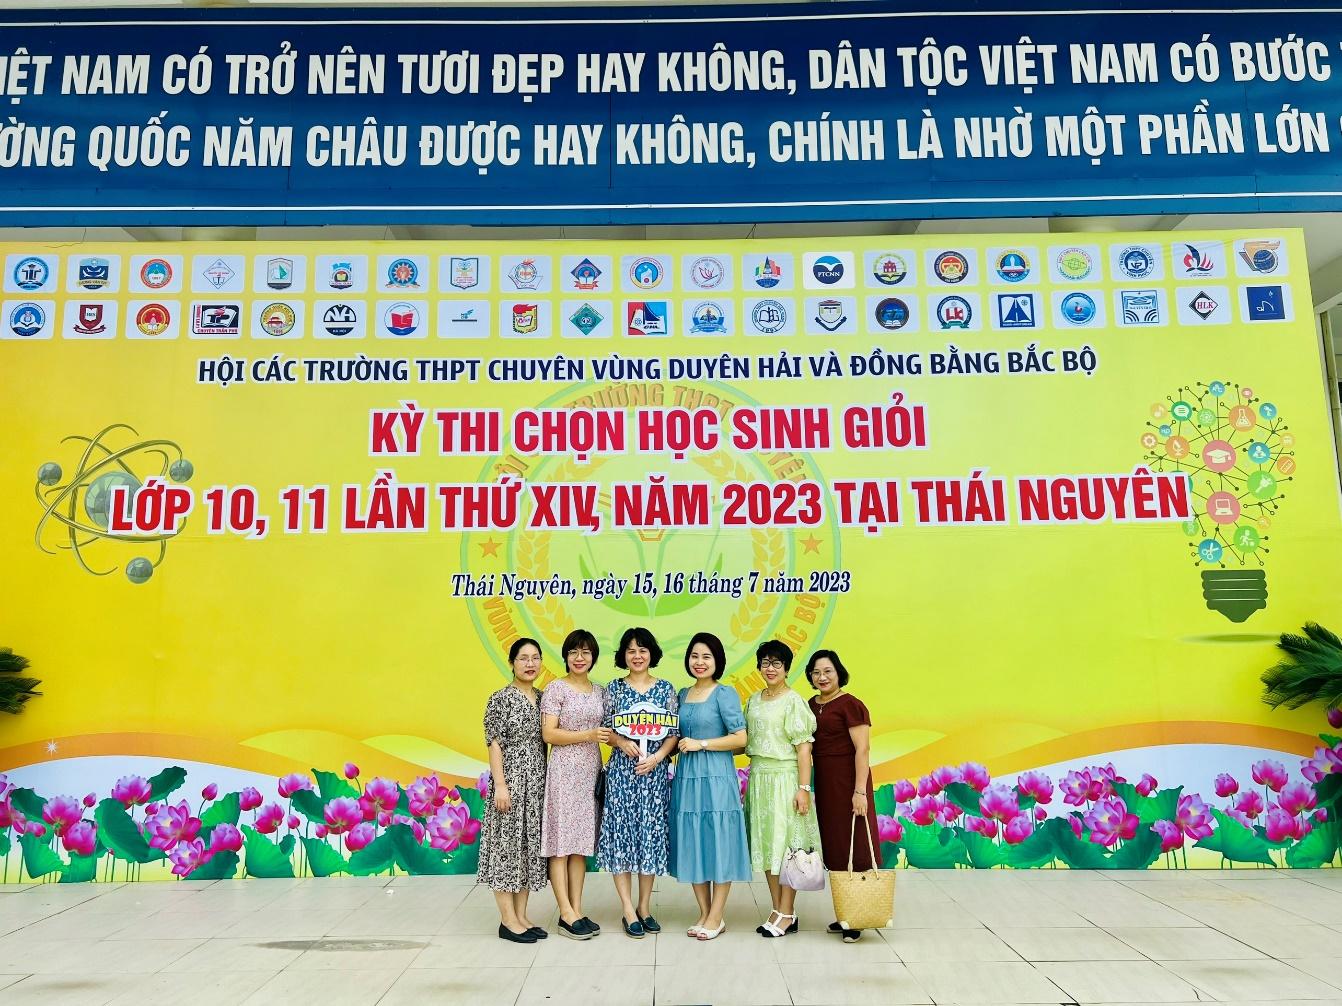 A group of women standing in front of a banner</p>
<p>Description automatically generated